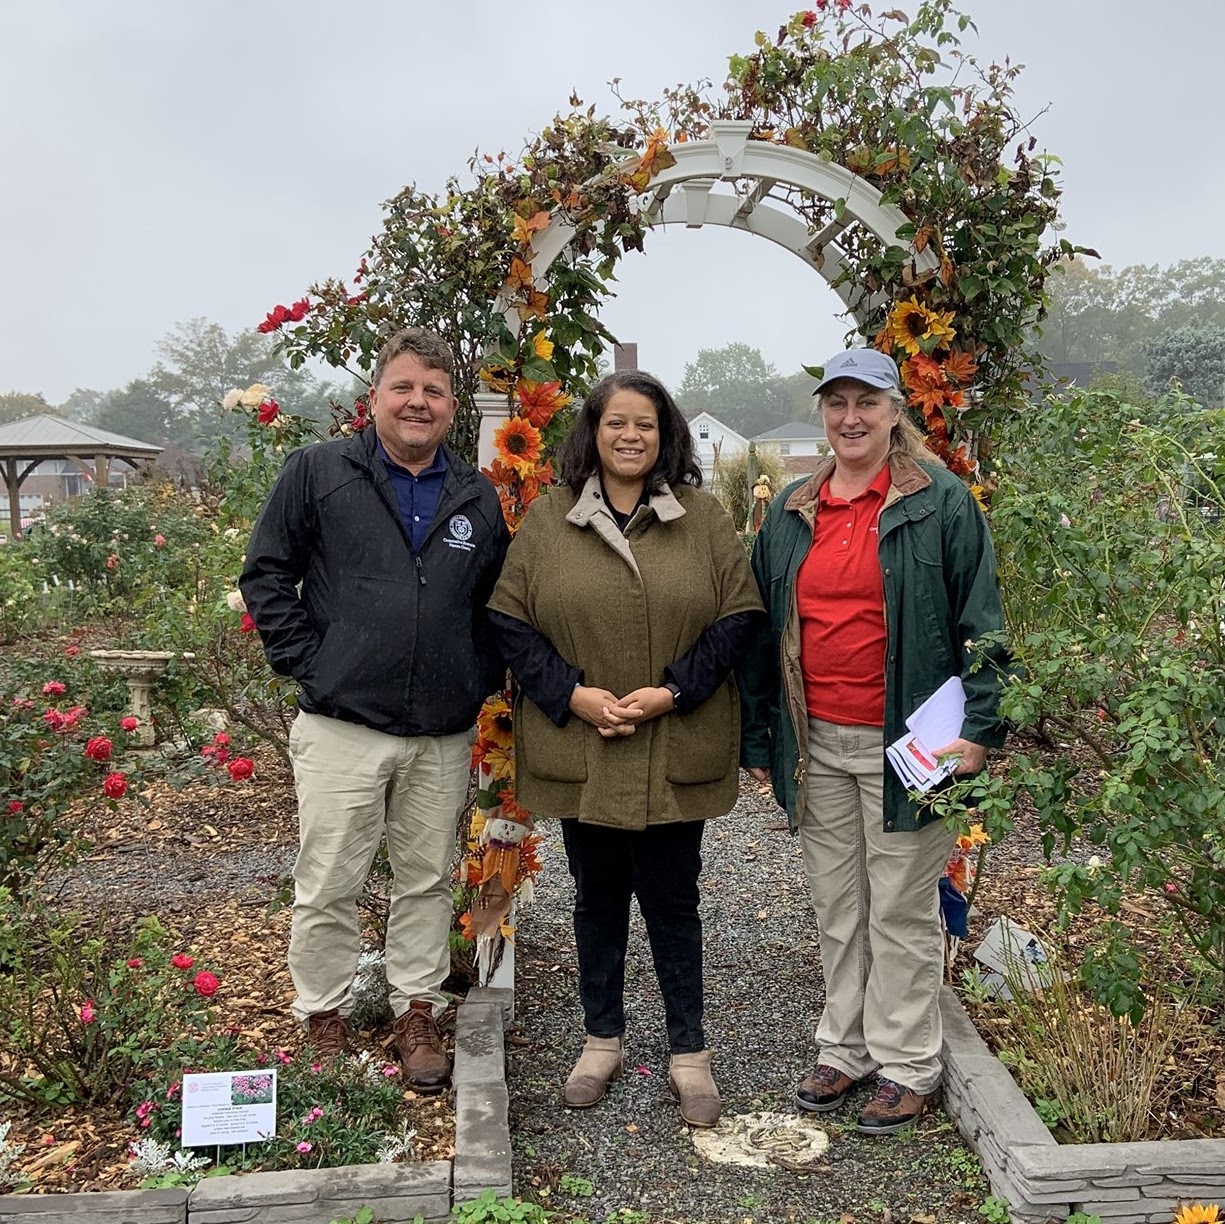 Gregory Sandor, the Executive Director of Cornell University Cooperative Extension - Nassau County, tours the East Meadow Farm with Farm Manager Mary Callanan and Assembly-member Michaelle Solages. (L-R: Gregory Sandor, Executive Director of Cornell Unive